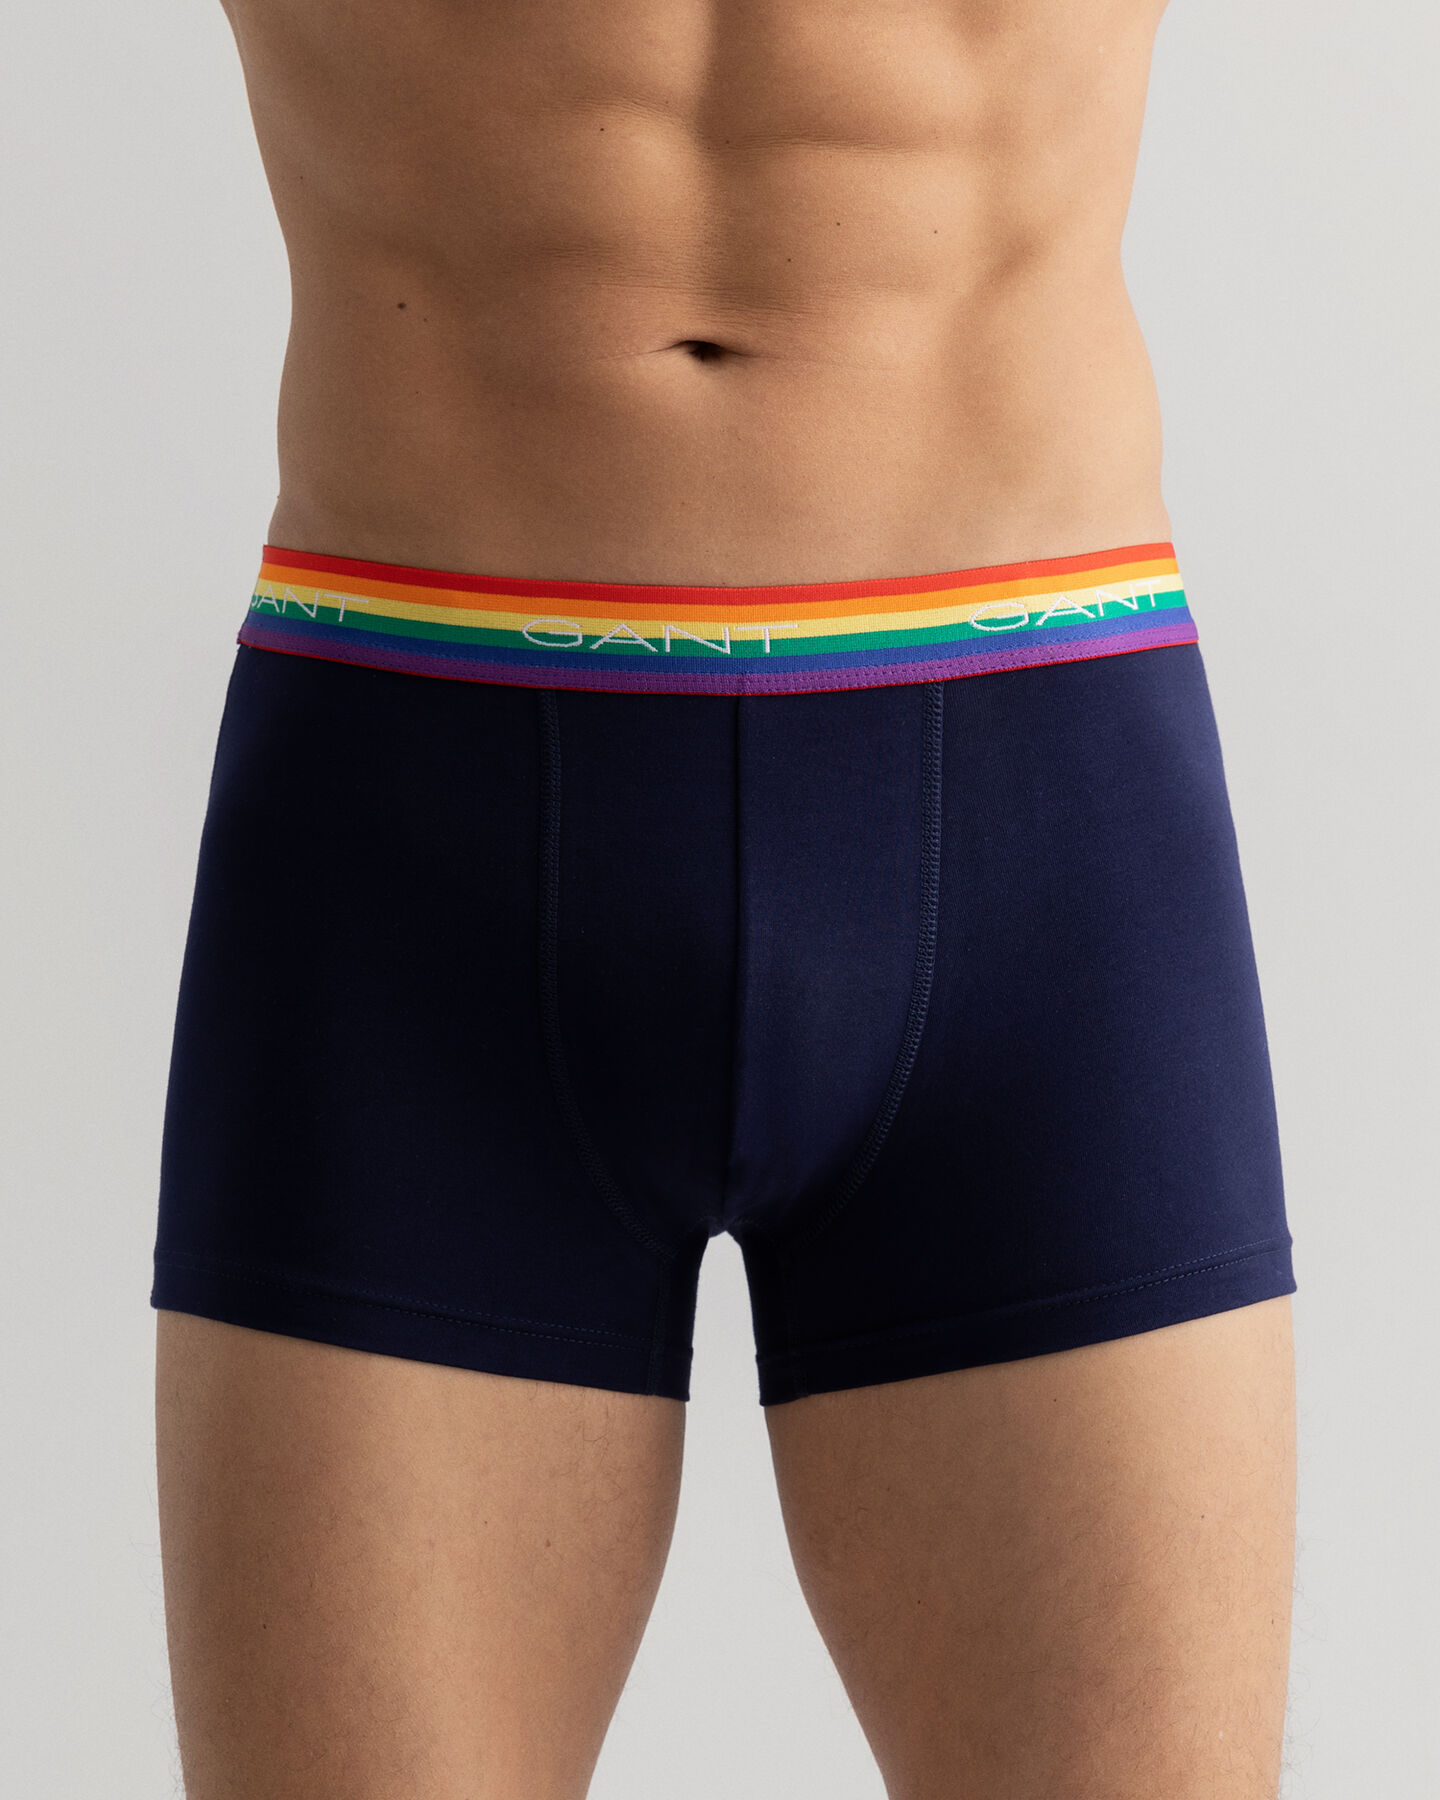 Calvin Klein Cotton Stretch 5 Pack Low Rise Trunk, Pride  Orange/Pink/Yellow/Blue/Turquoise